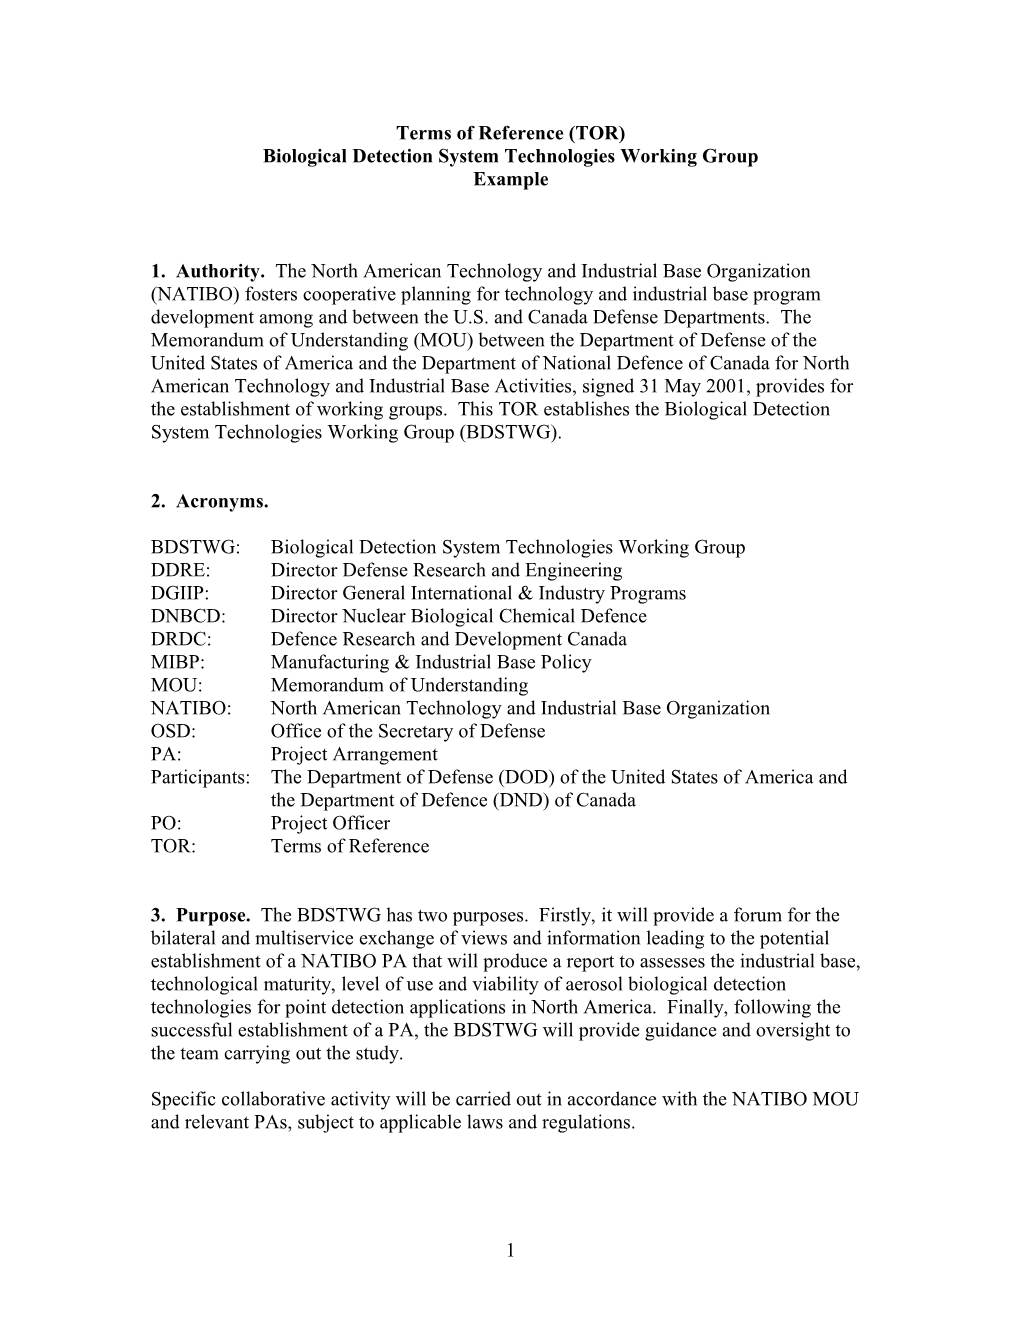 Biological Detection System Technologies Working Group